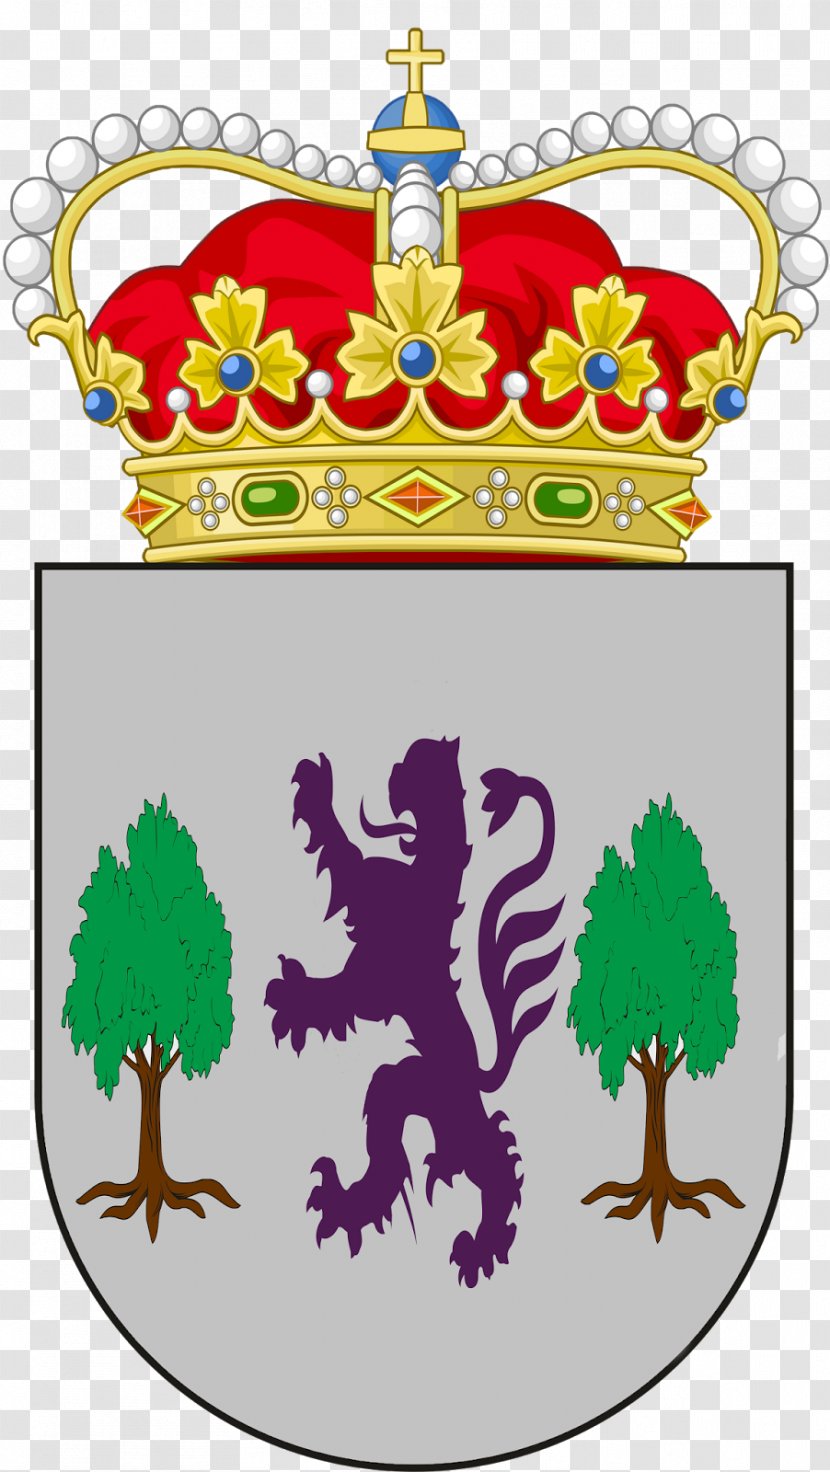 Marketing Association Of Spain Crown Royal Cypher Heraldry Spanish Family Transparent PNG